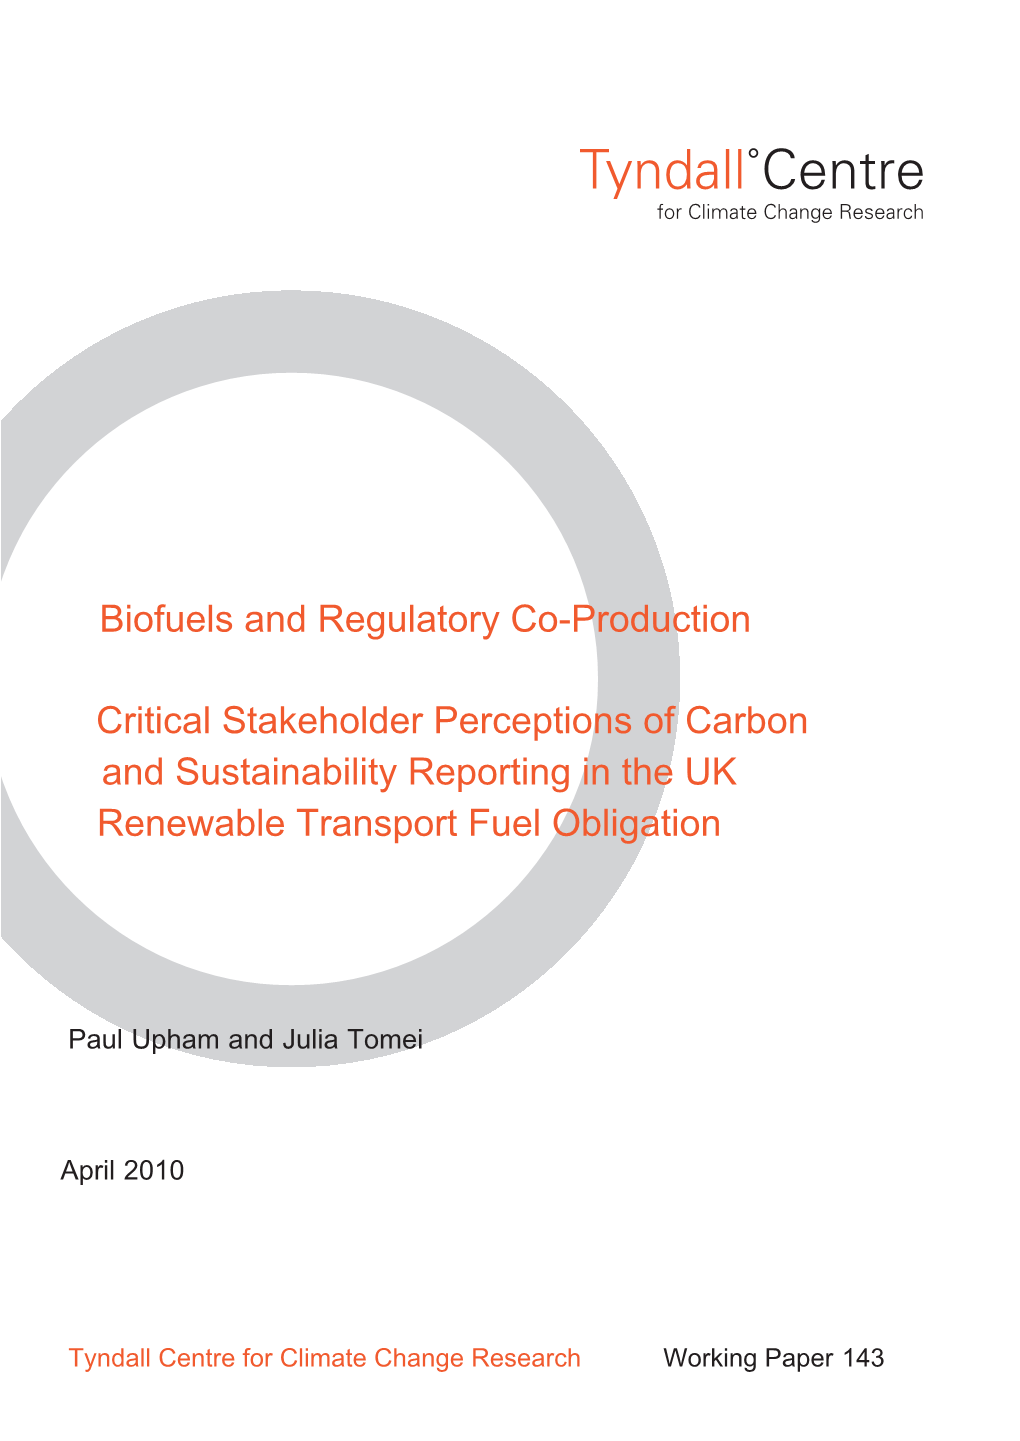 Critical Stakeholder Perceptions of Carbon and Sustainability Reporting in the UK Renewable Transport Fuel Obligation